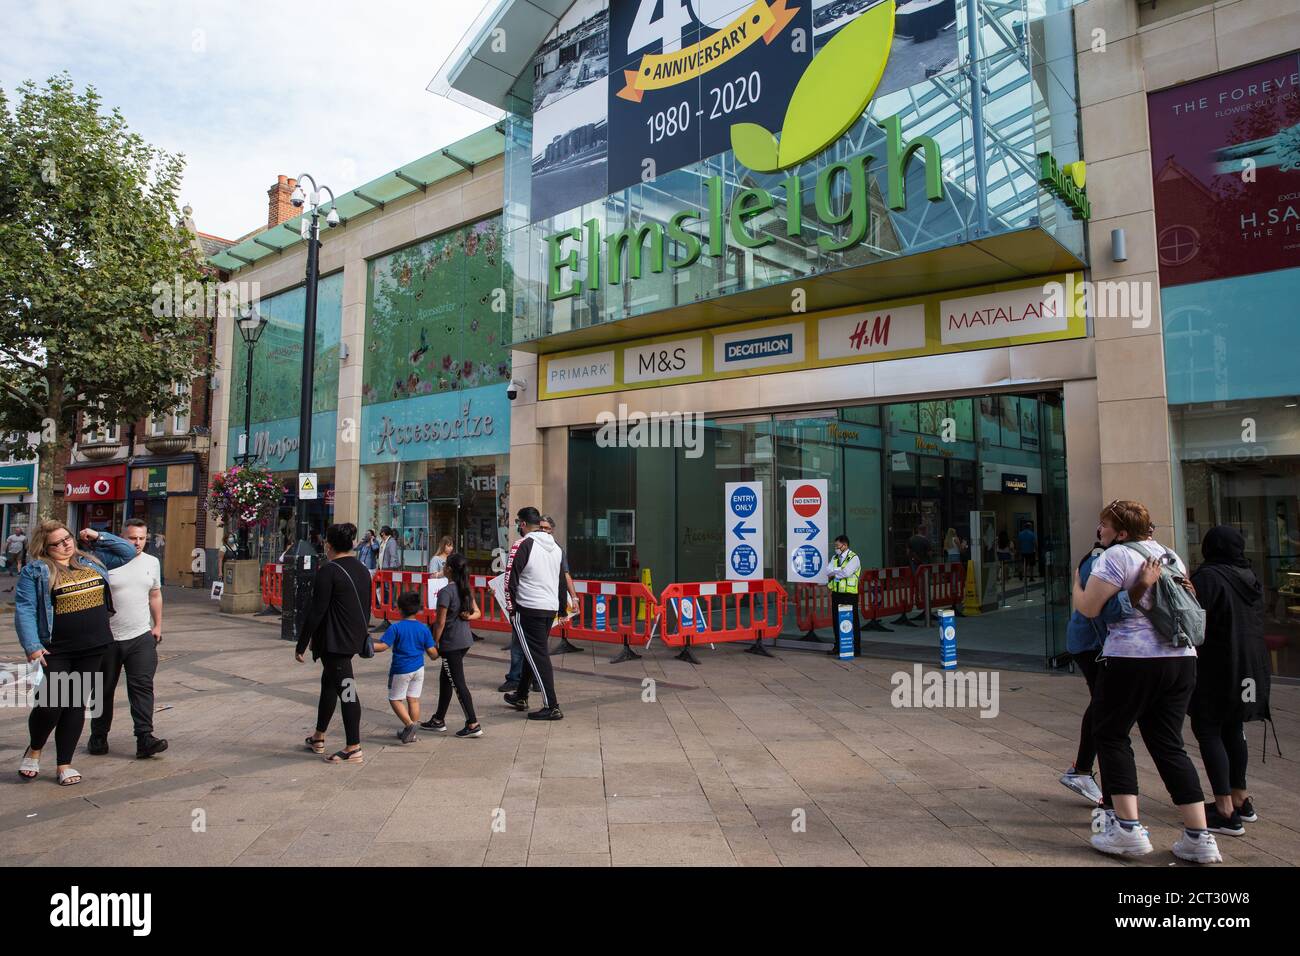 Staines-upon-Thames, UK. 20th September, 2020. Local residents do some Sunday shopping in the town centre. The Borough of Spelthorne, of which Staines-upon-Thames forms part along with Ashford, Sunbury-upon-Thames, Stanwell, Shepperton and Laleham, has been declared an Ôarea of concernÕ for COVID-19 by the government following a marked rise in coronavirus infections which is inconsistent with other areas of Surrey. Credit: Mark Kerrison/Alamy Live News Stock Photo